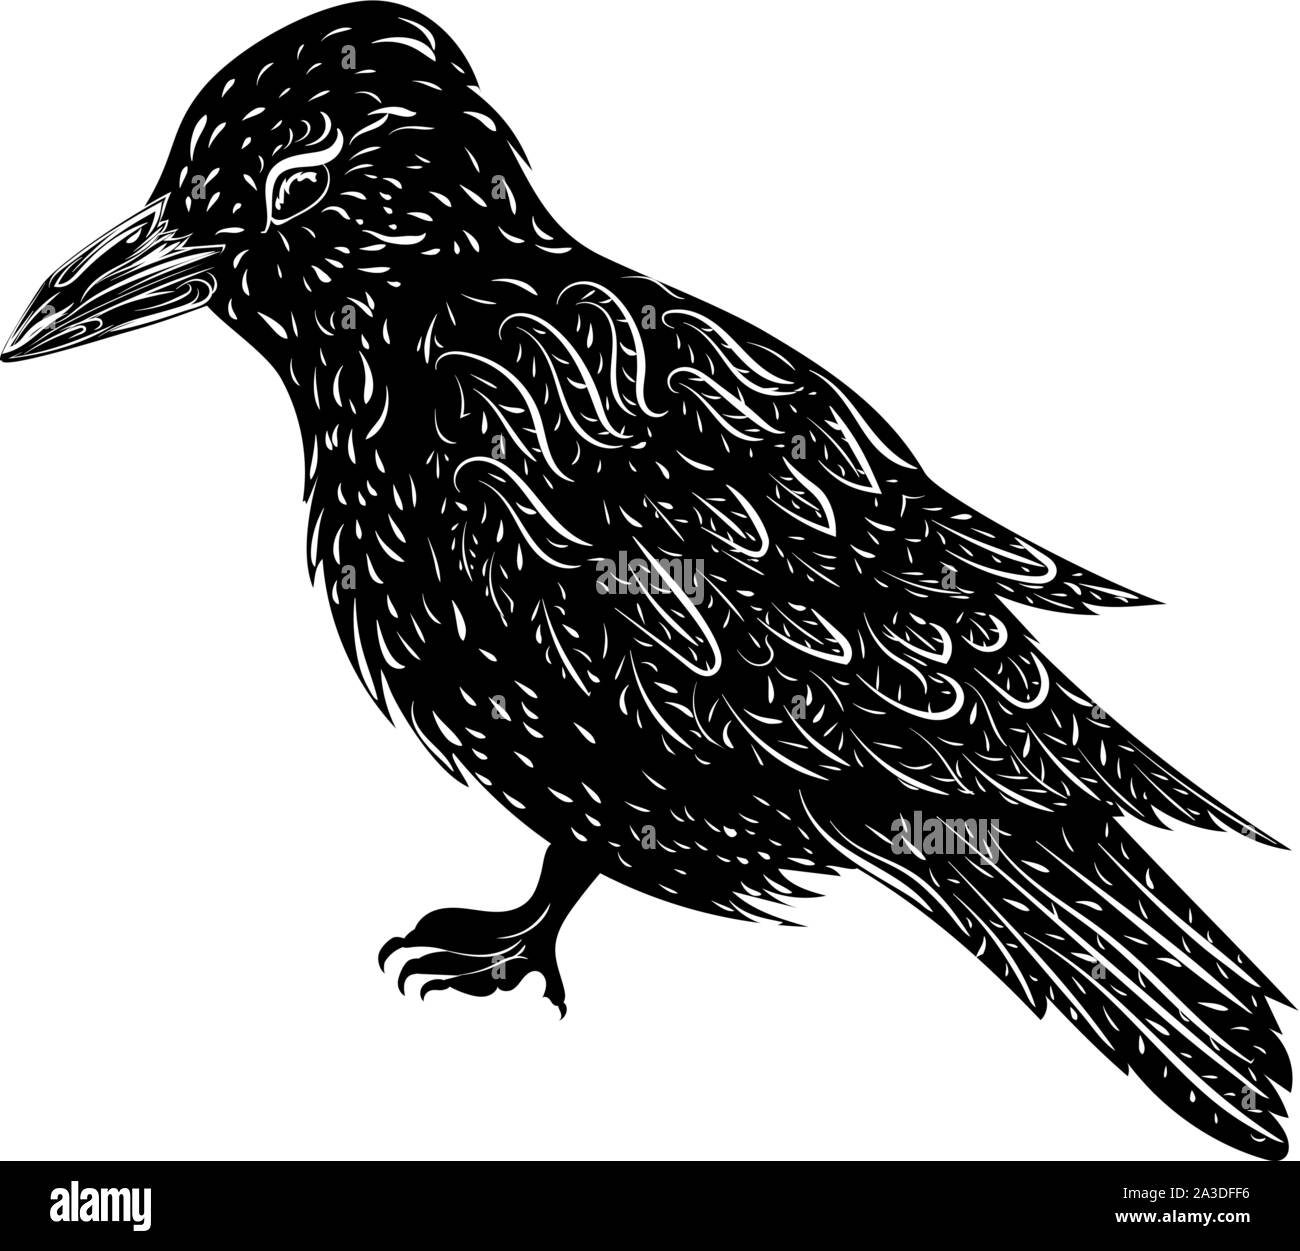 Raven tattoo Black and White Stock Photos  Images  Page 3  Alamy